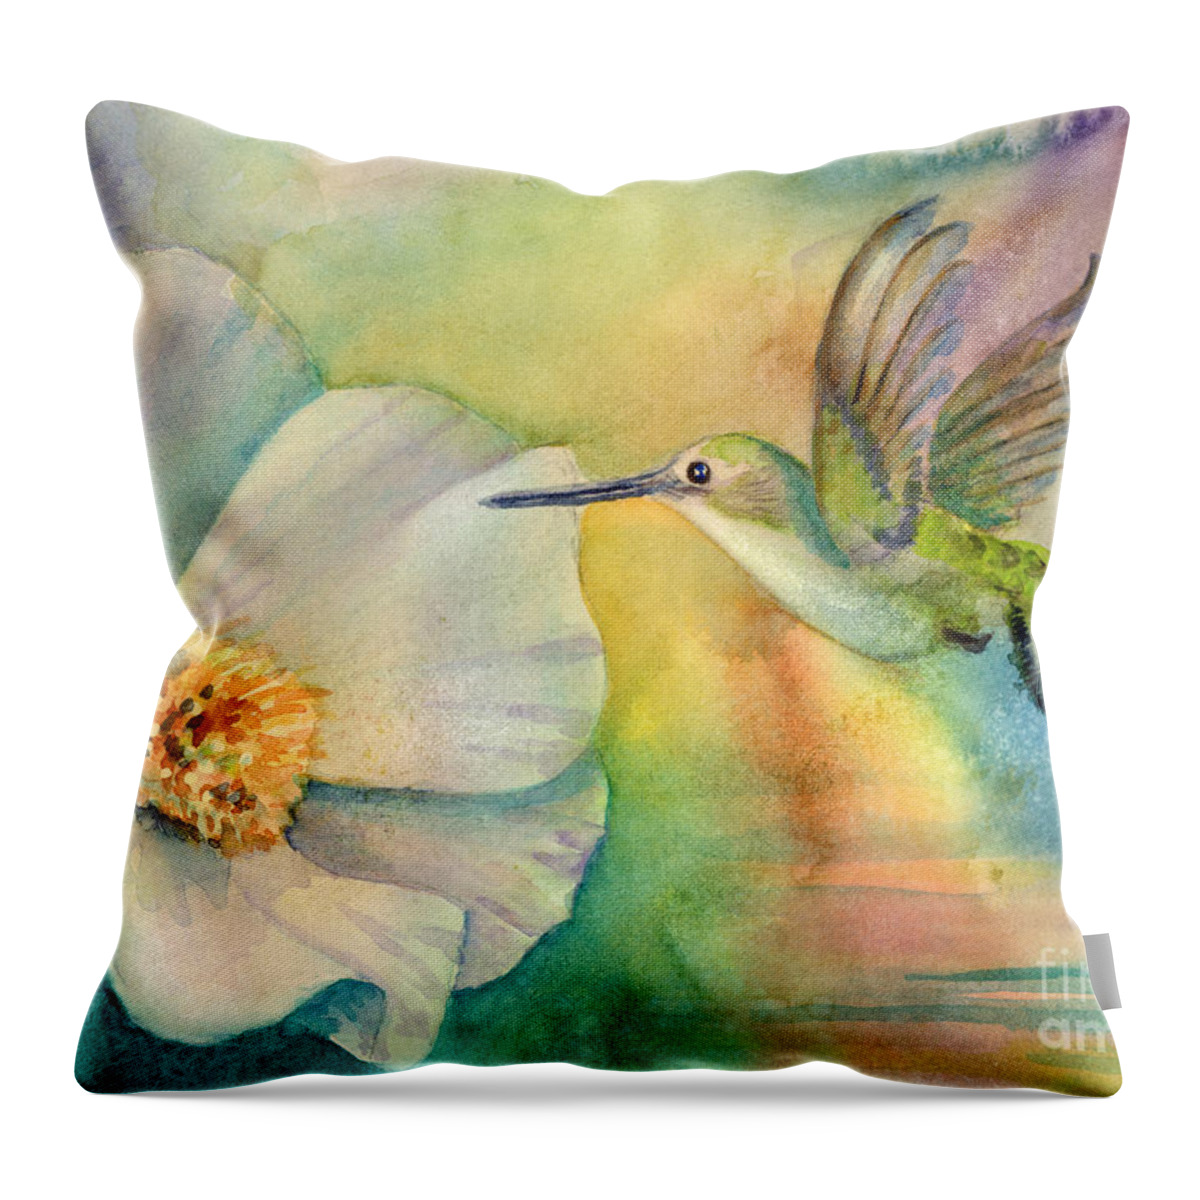 Hummingbird Throw Pillow featuring the painting Morning Glory by Amy Kirkpatrick